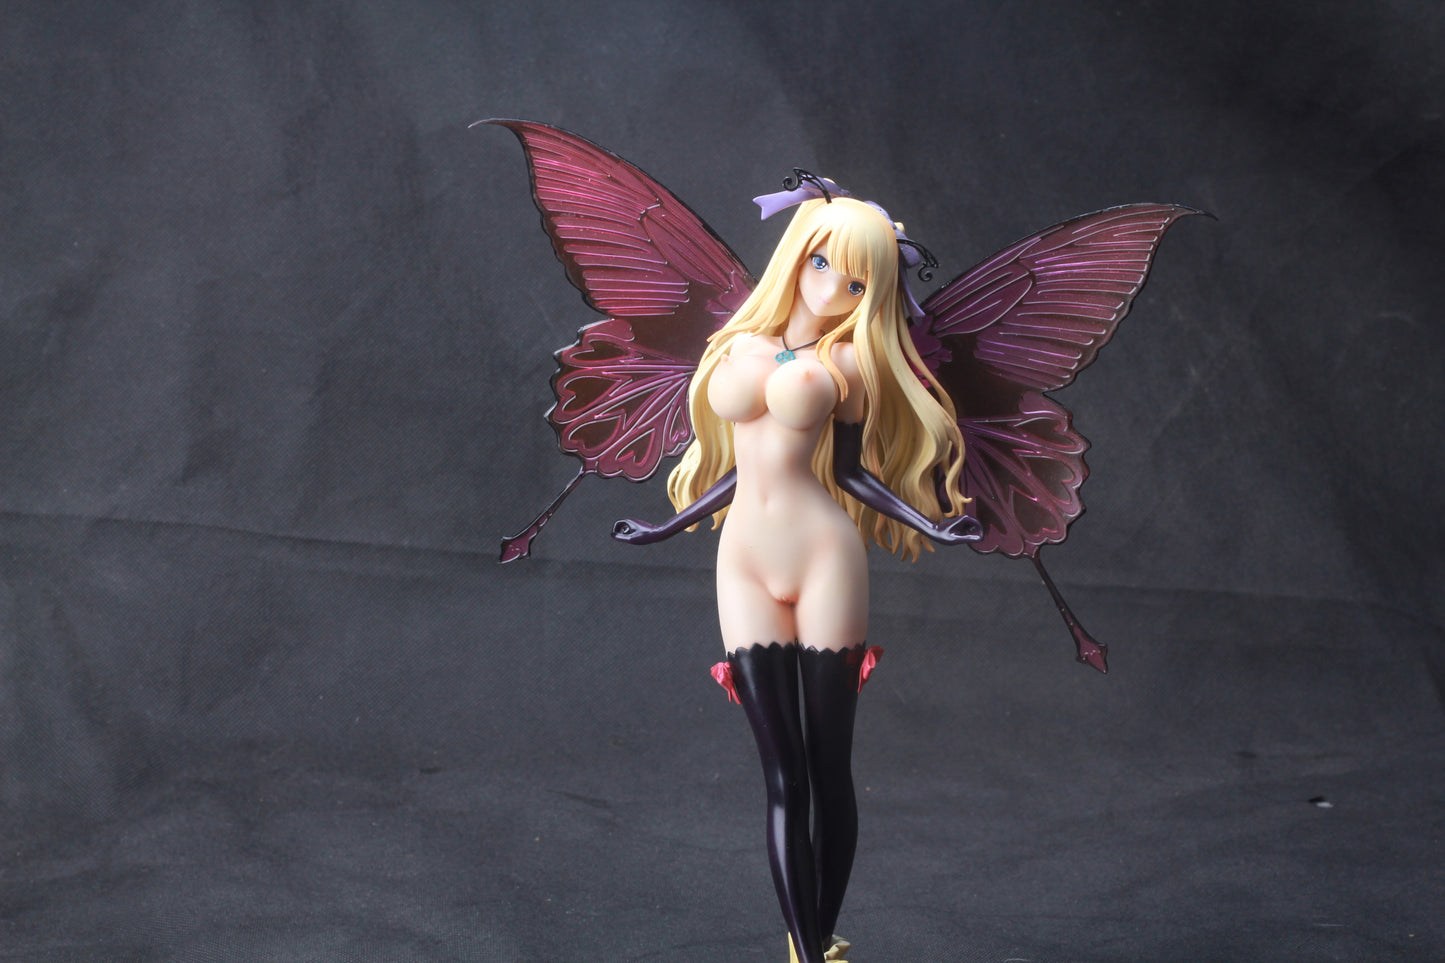 4-Leaves Tony Heroine Collection Fairy Garden sexy Annabel Butterfly Wings 1/6 anime girl figure